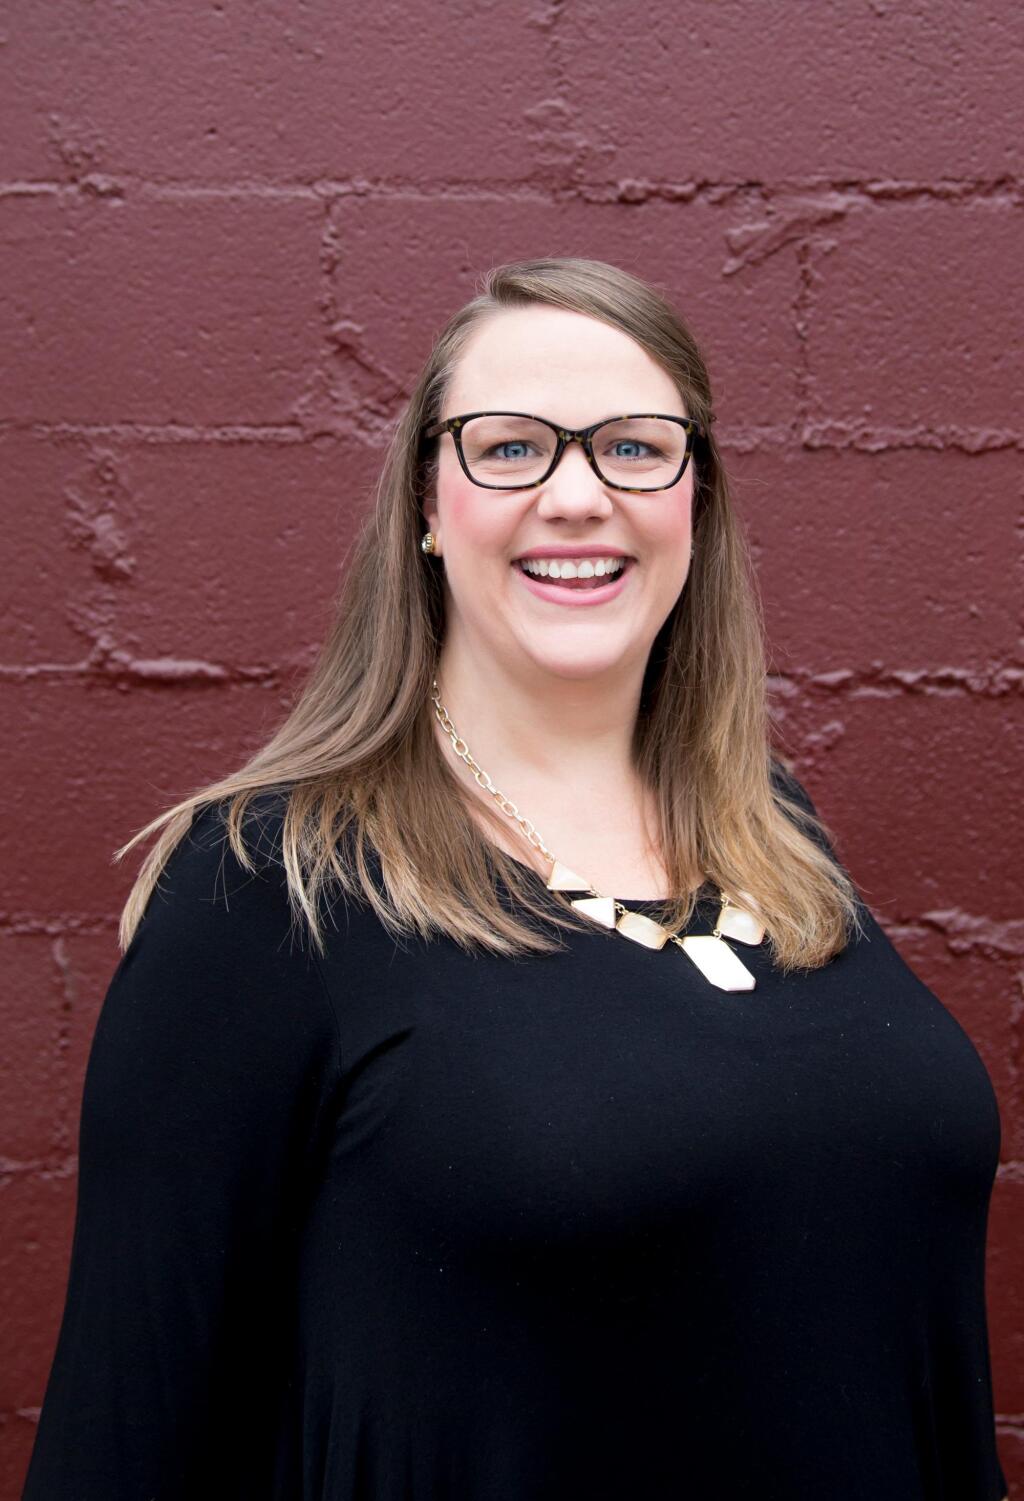 Andrea “Drea” Schulze, 38, director of Business Services for The Engine is Red in Santa Rosa, is a 2022 North Bay Business Journal Forty Under 40 Award winner. The winners will be recognized at a Tuesday, April 19 event from 4 to 6:30 p.m. at The Blue Ridge Kitchen at The Barlow in Sebastopol.